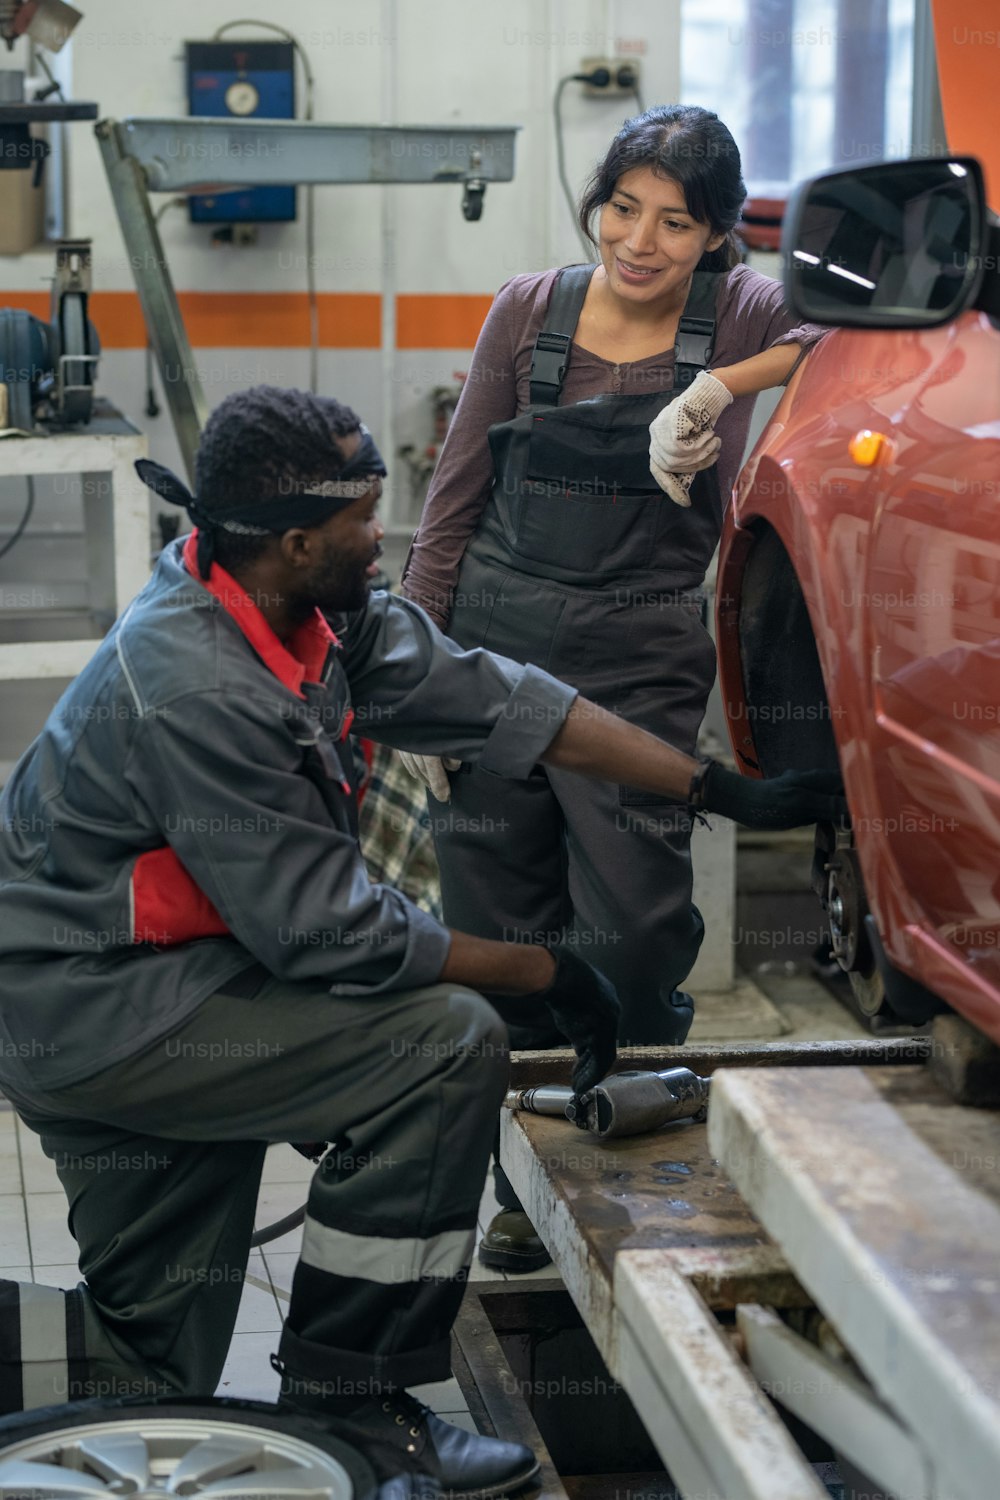 Vertical portrait of two ethnic mechanics repairing car in garage shop, focus on smiling young woman wearing workwear